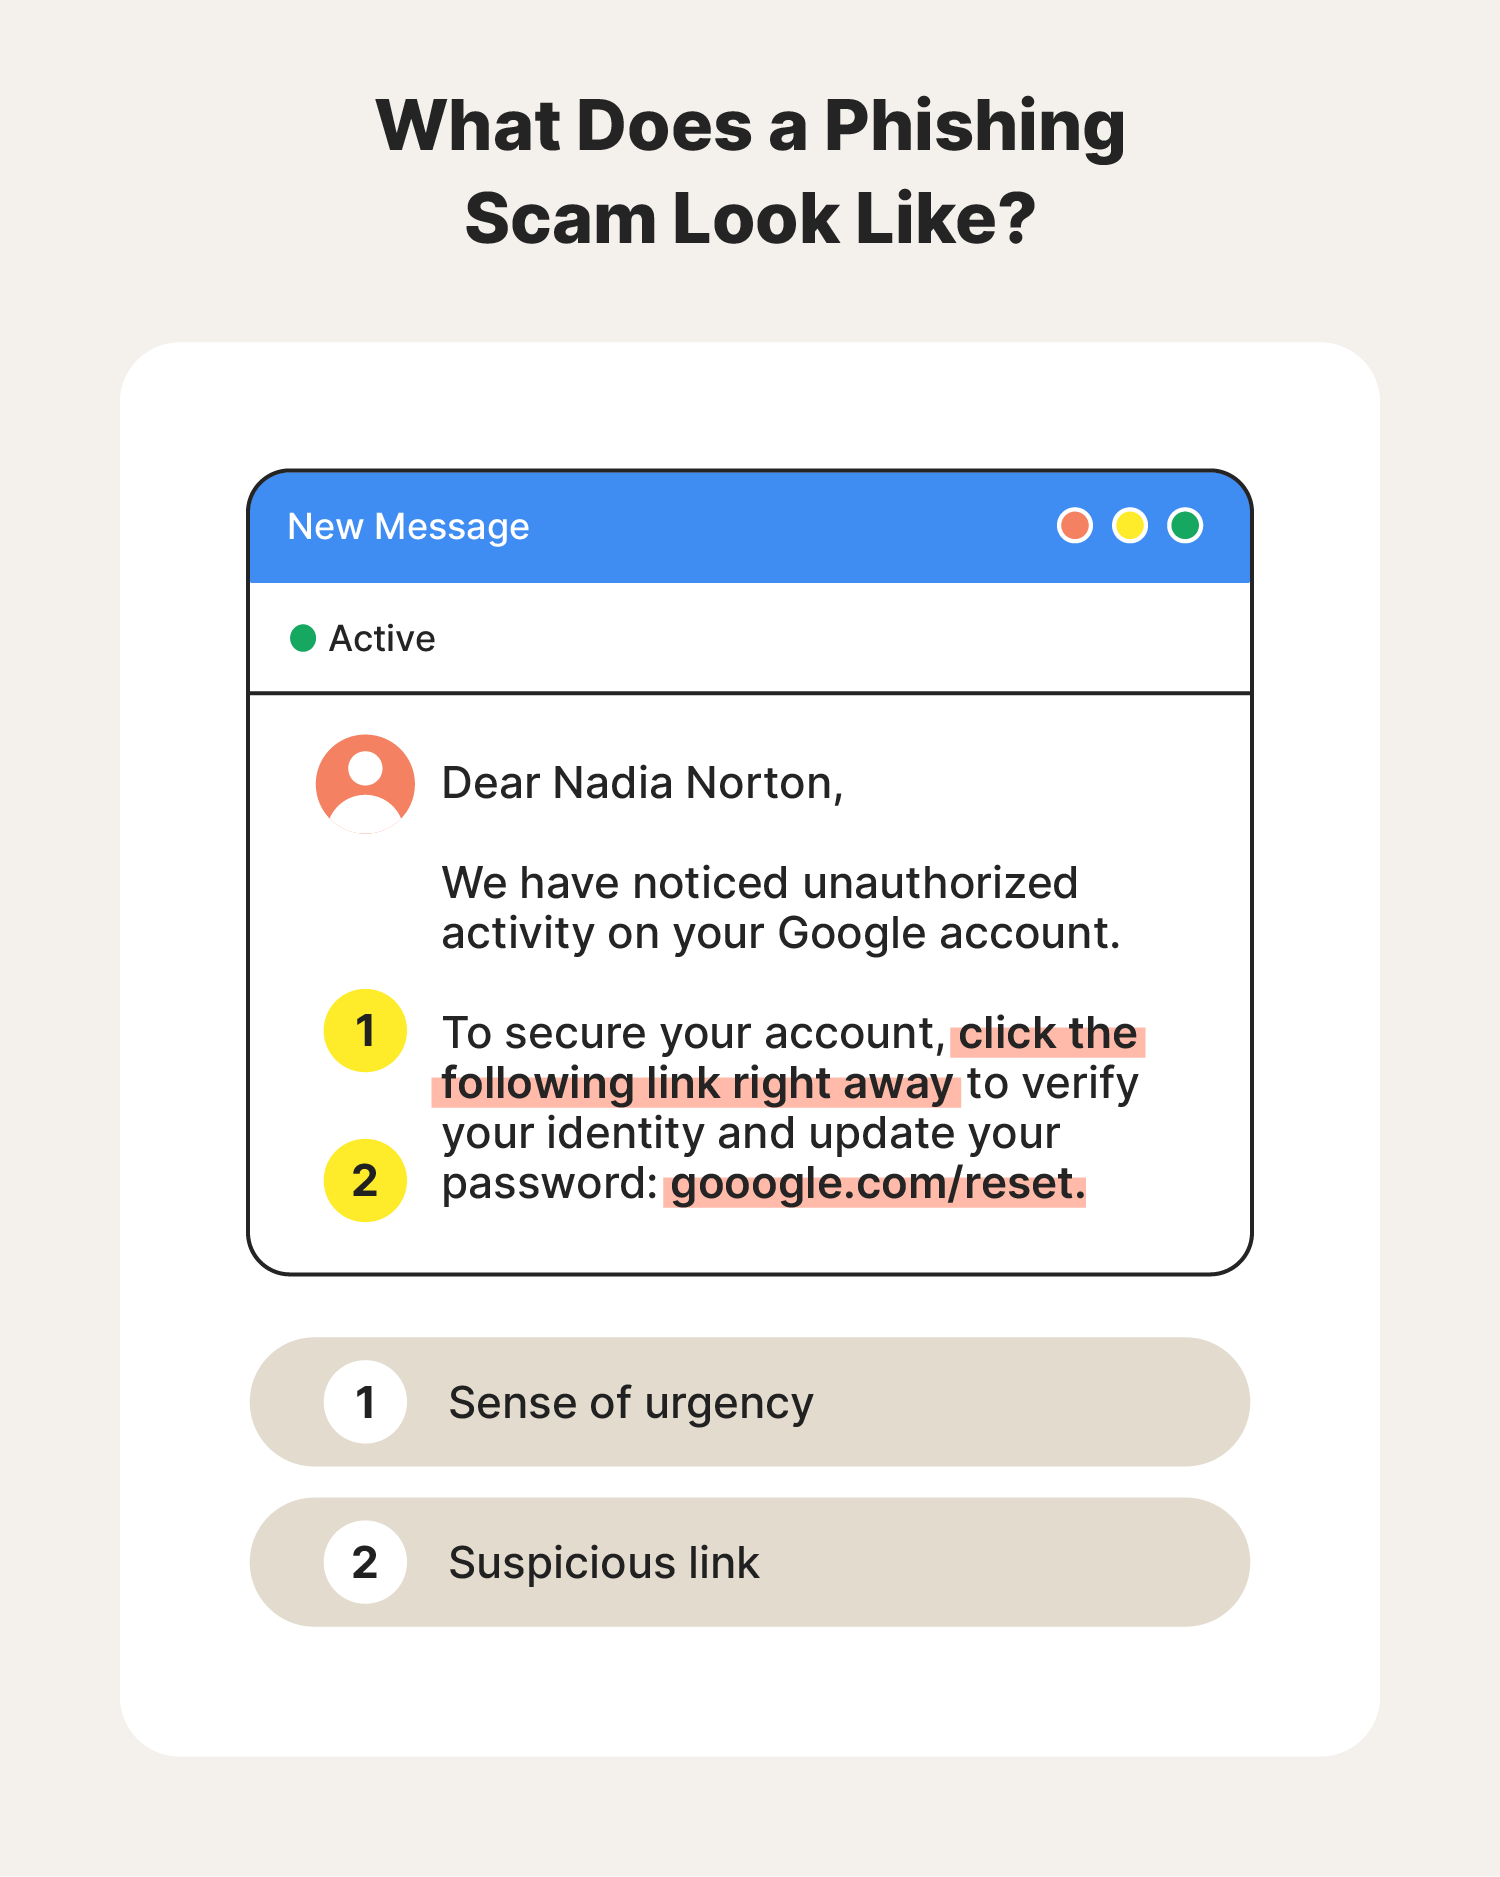 An example of a Google Chat scam using phishing techniques.